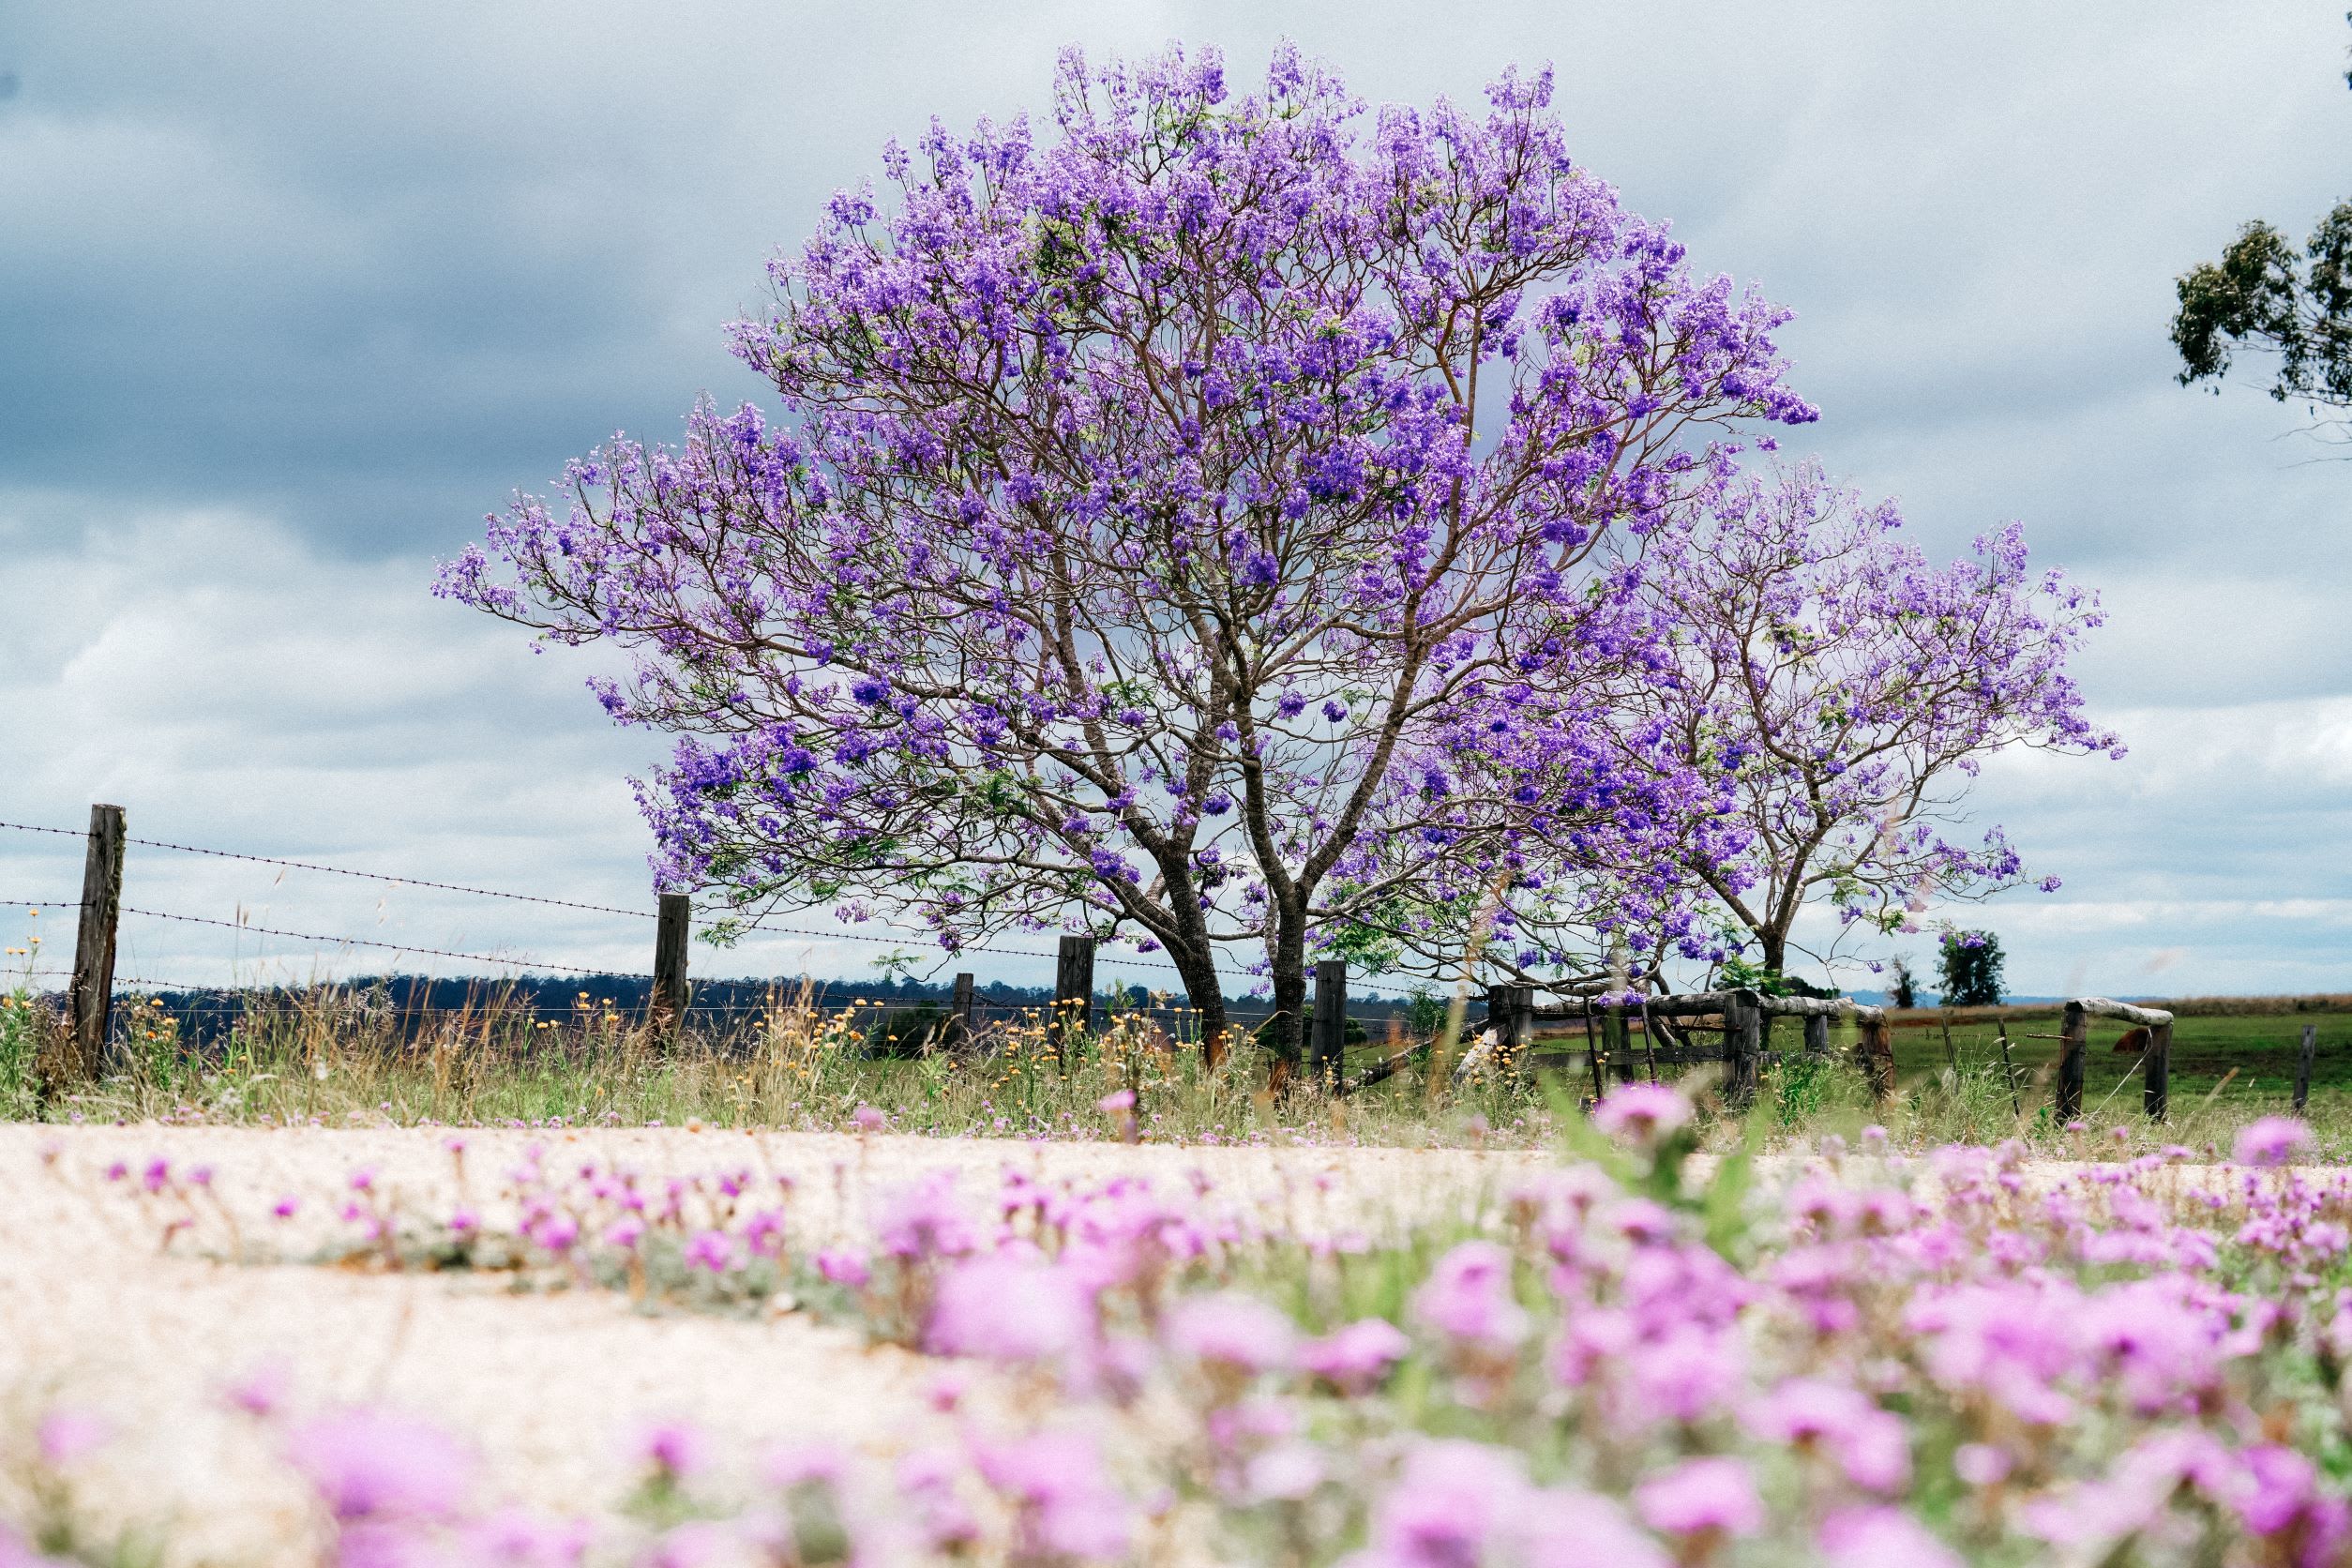 a beautiful Jacaranda in bloom just down the road from the gates of the property, wildflowers litter the roadsides in the springtime